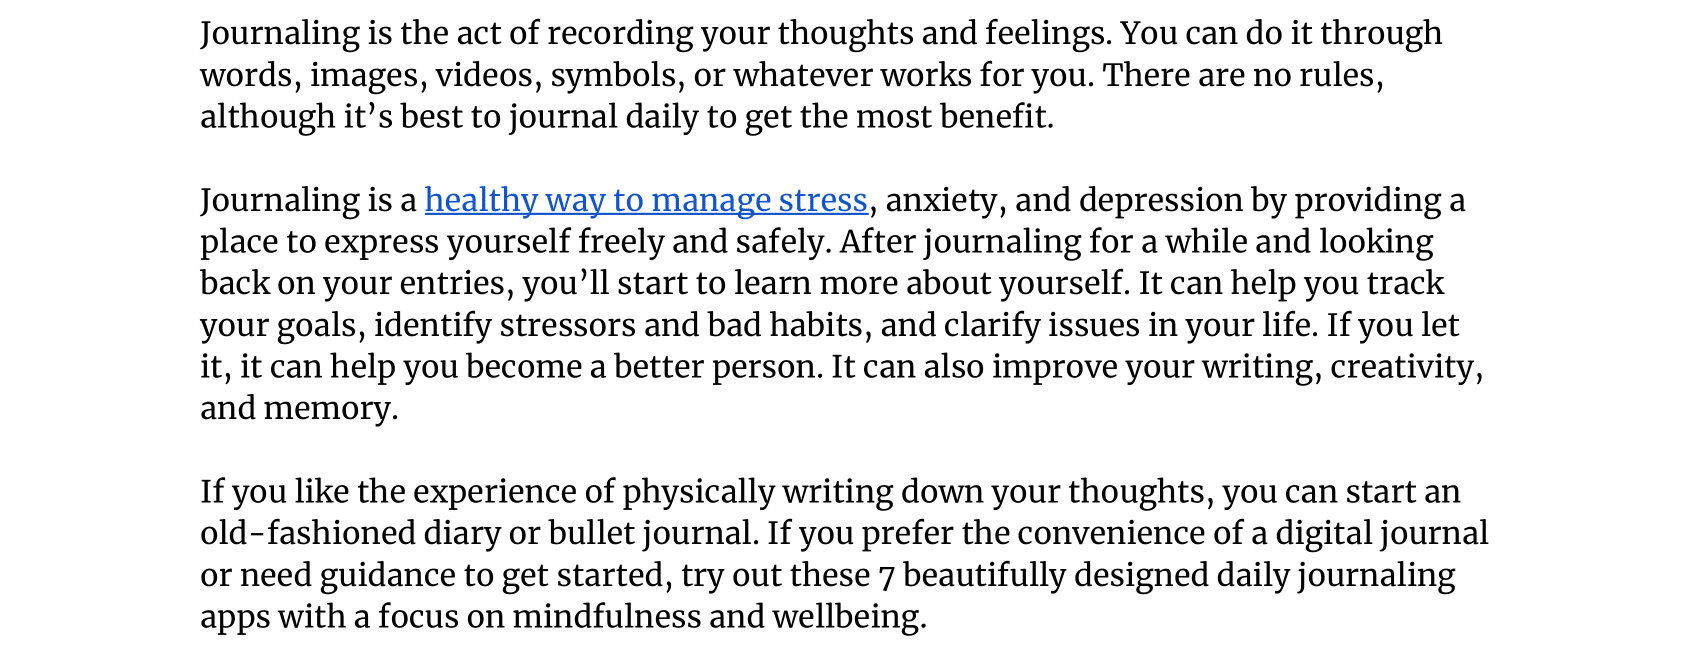 fj7-Best-Apps-for-Daily-Wellness-Journaling-1